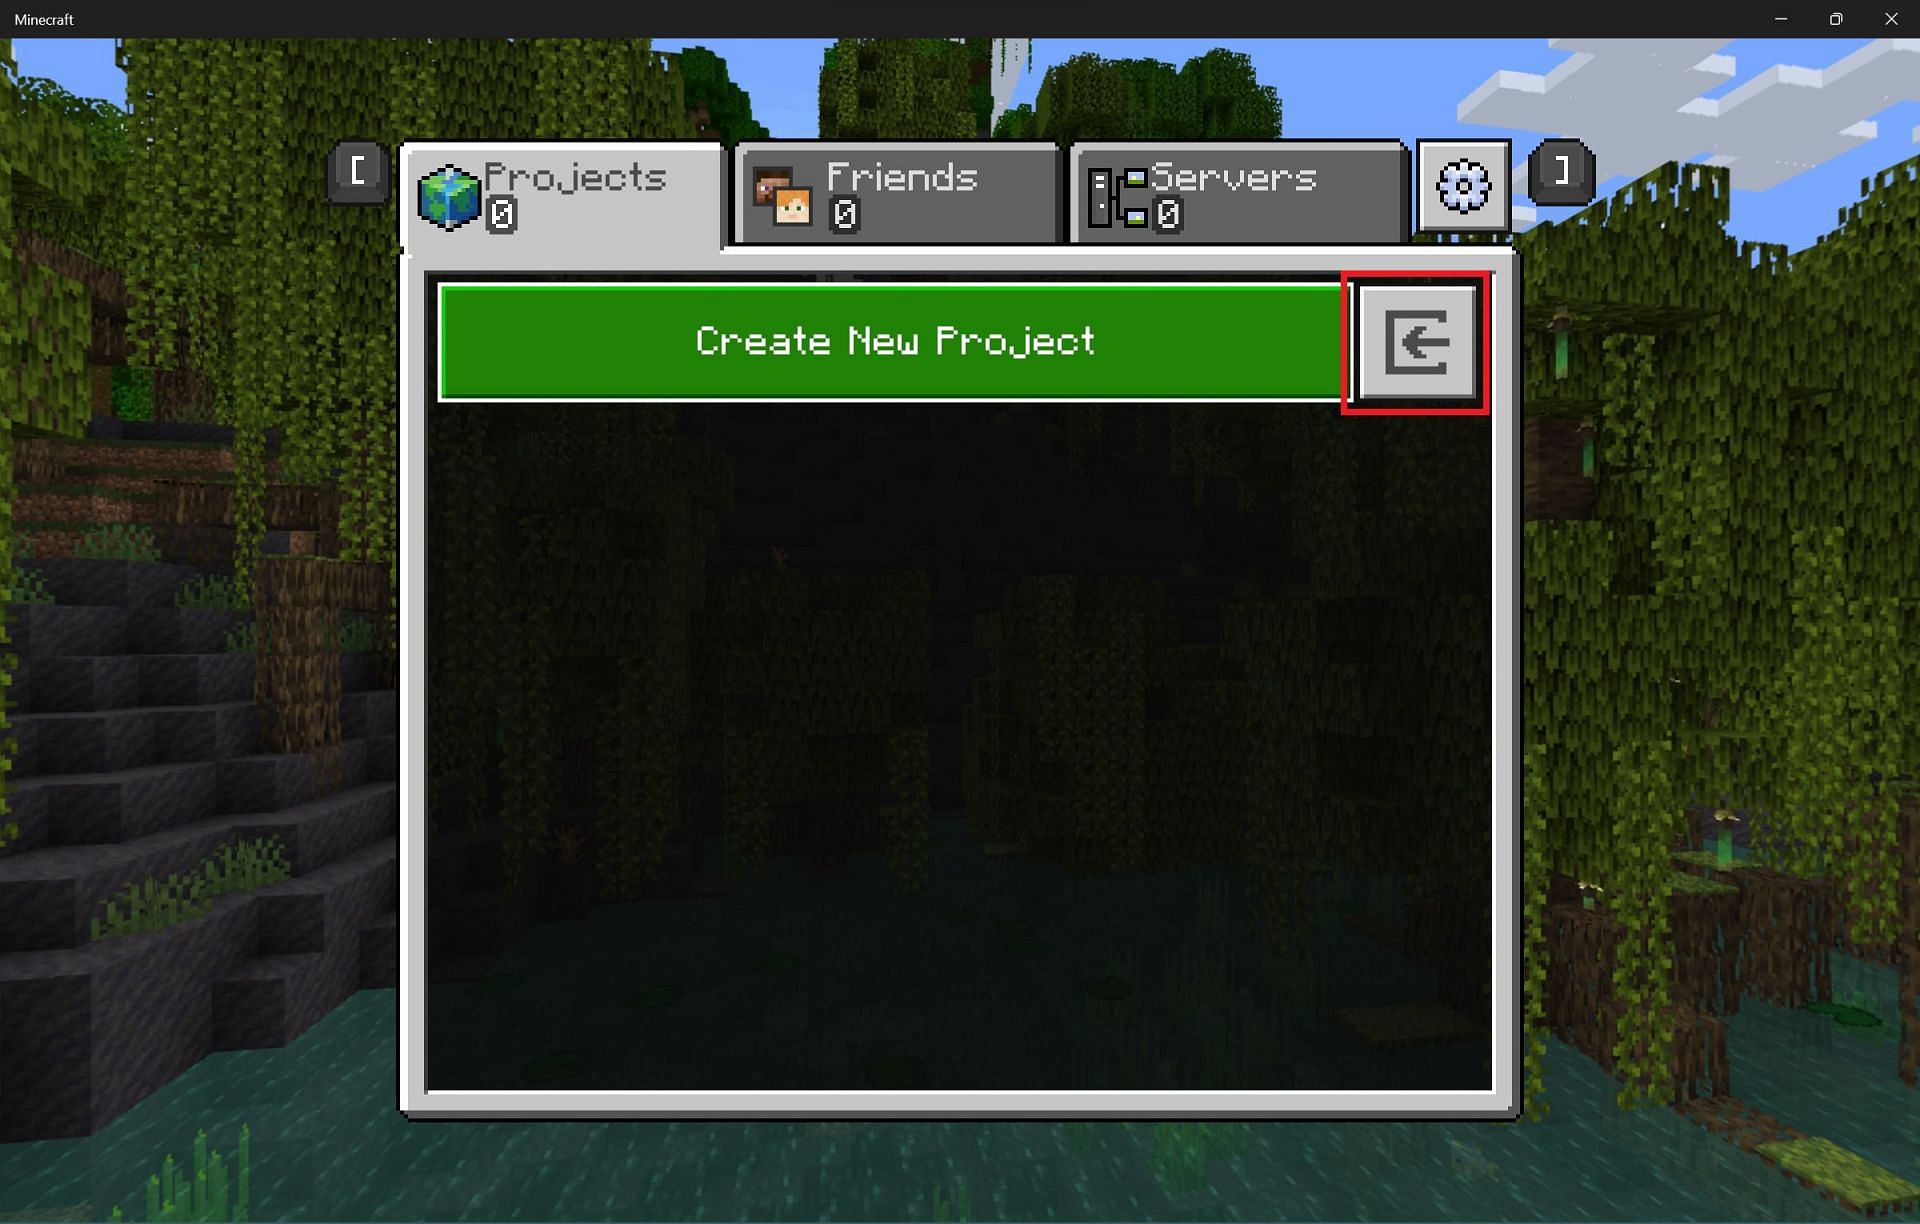 Start new projects with Editor mode in Bedrock (Image via Mojang/Microsoft)